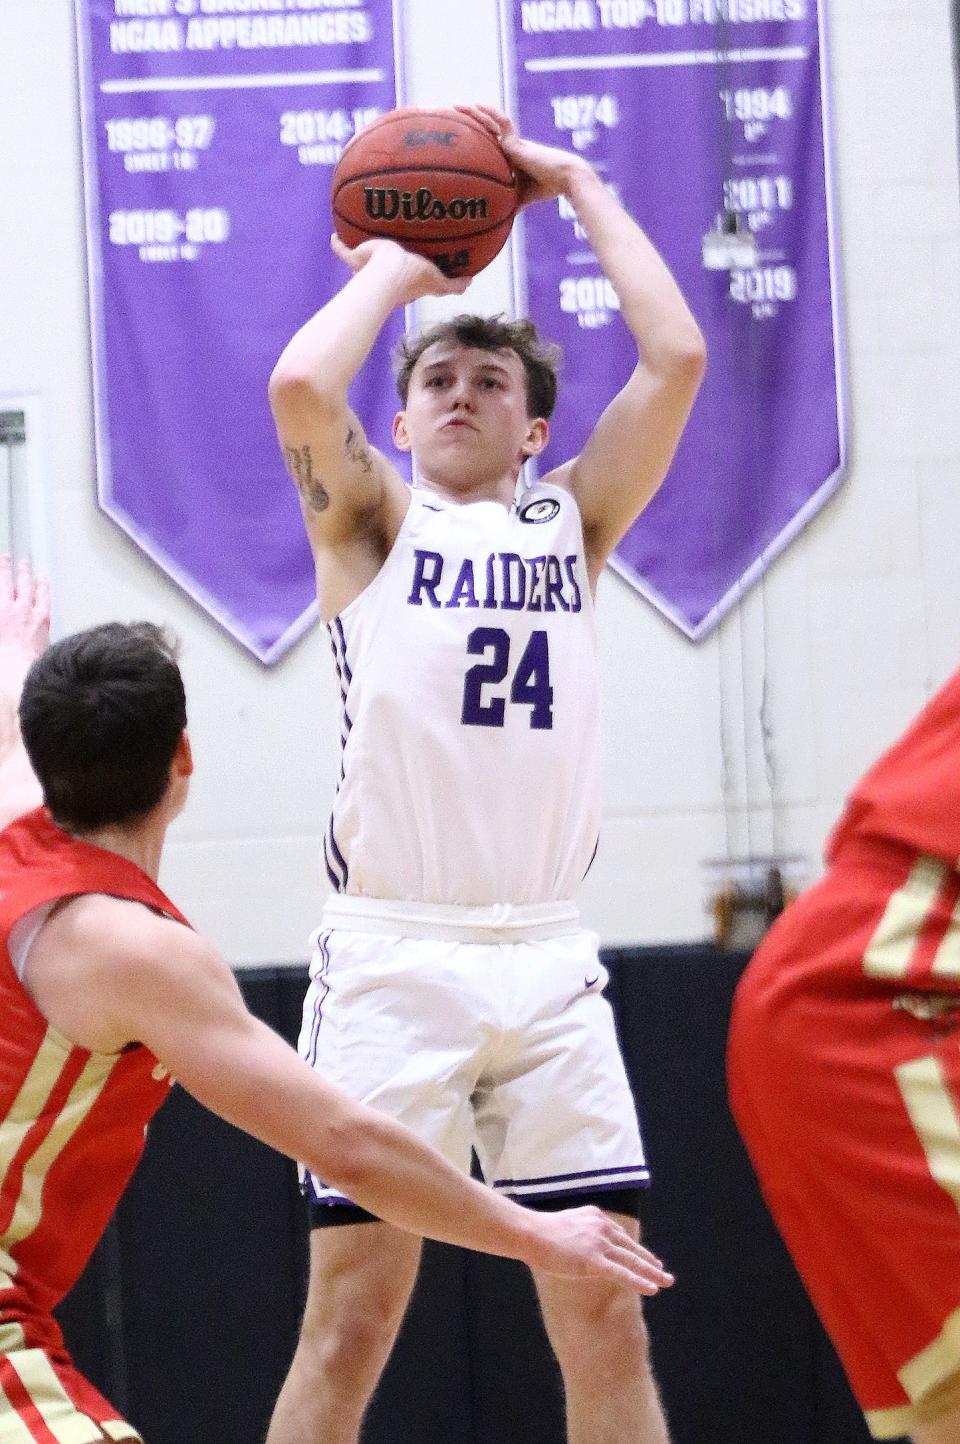 Mount Union's Ethan Stanislawski puts up a shot during OAC action at Mount Union Saturday, January 15, 2022.